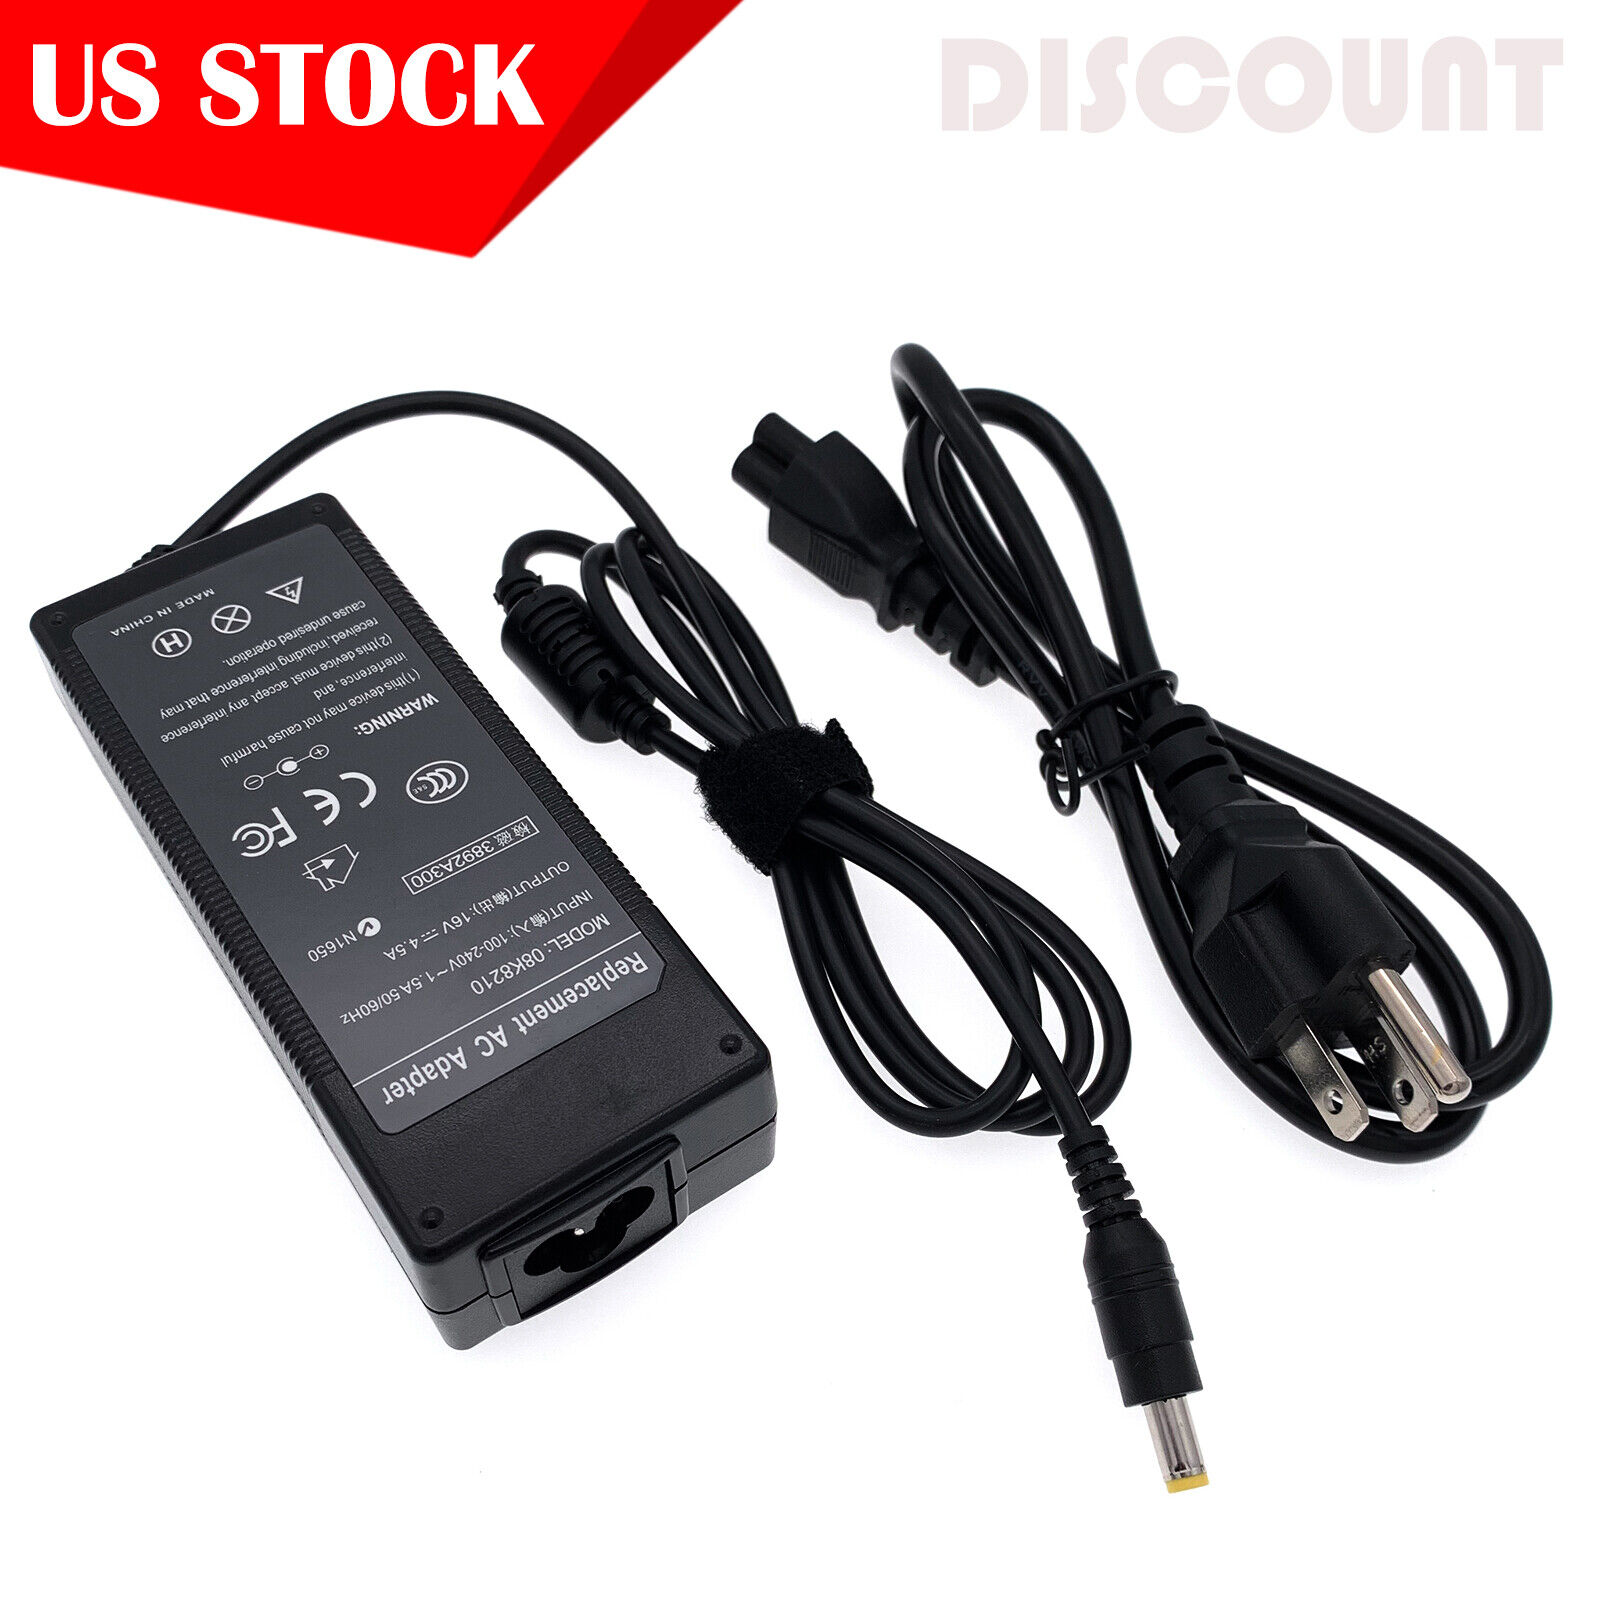 AC Adapter Power Cord Battery Charger For IBM Thinkpad R50e Type 1834 1842 2670